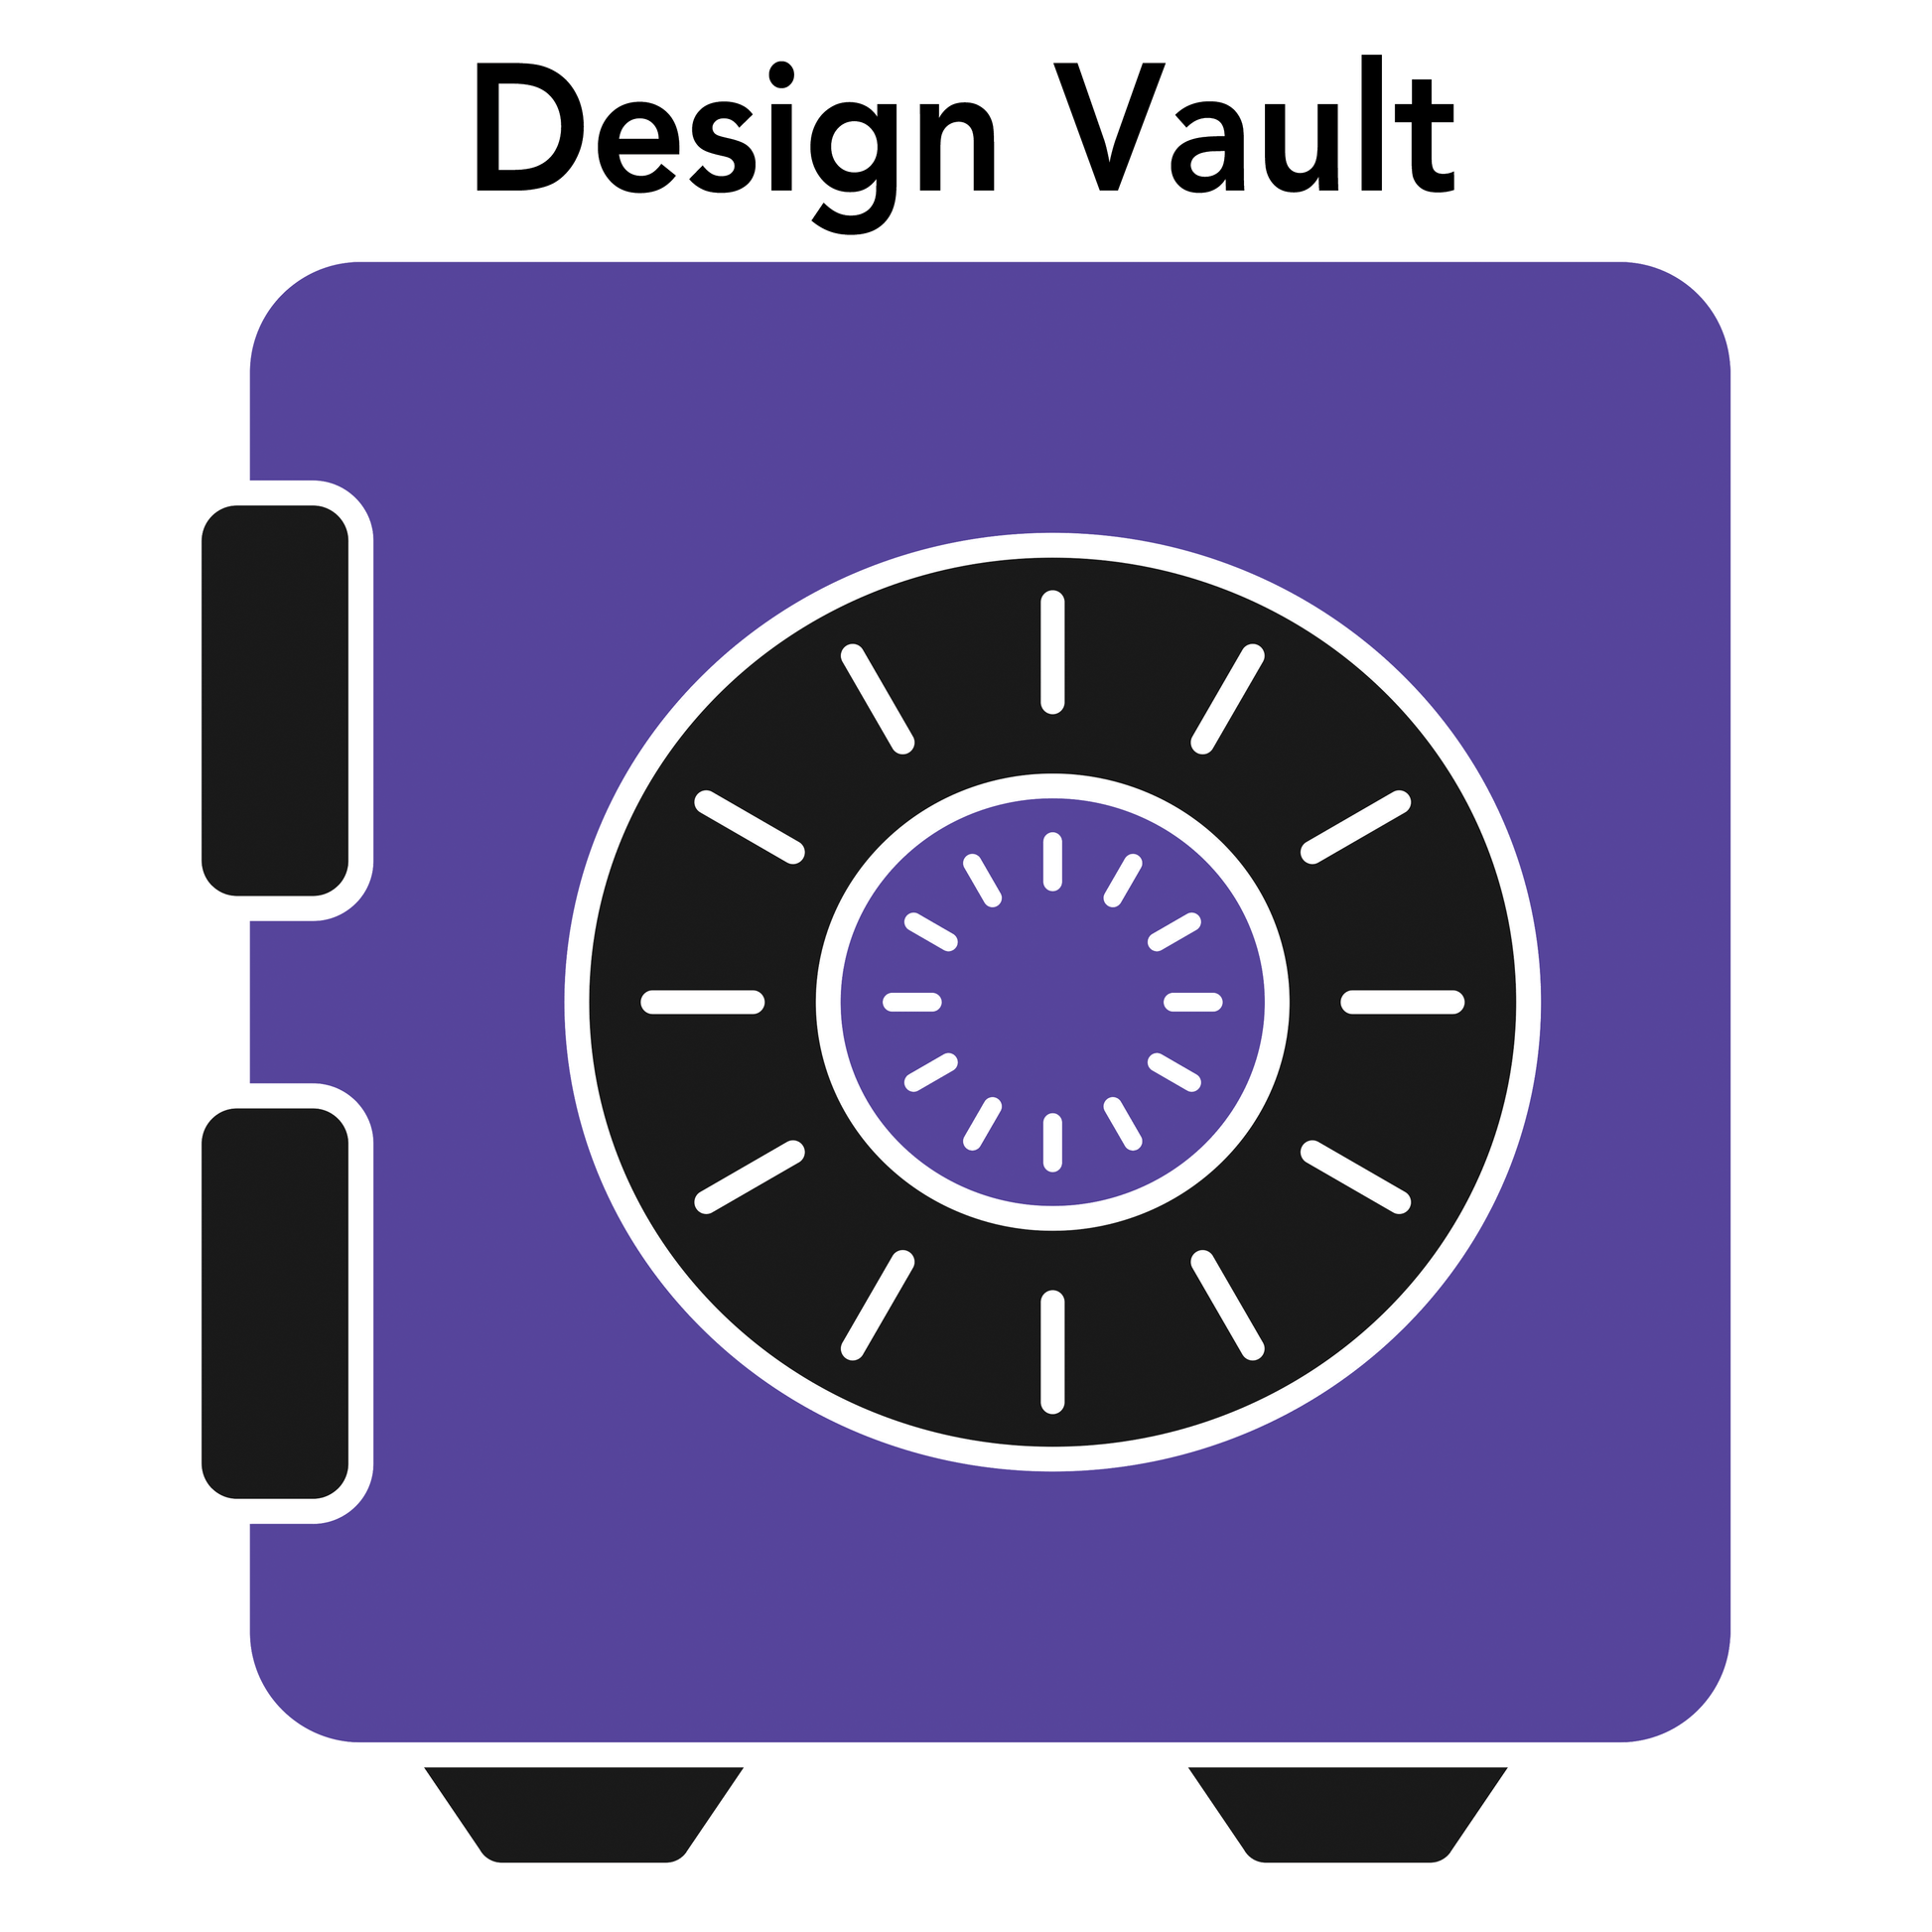 Fest Flags DESIGN VAULT - Save my images in the Fest Flags Design Vault